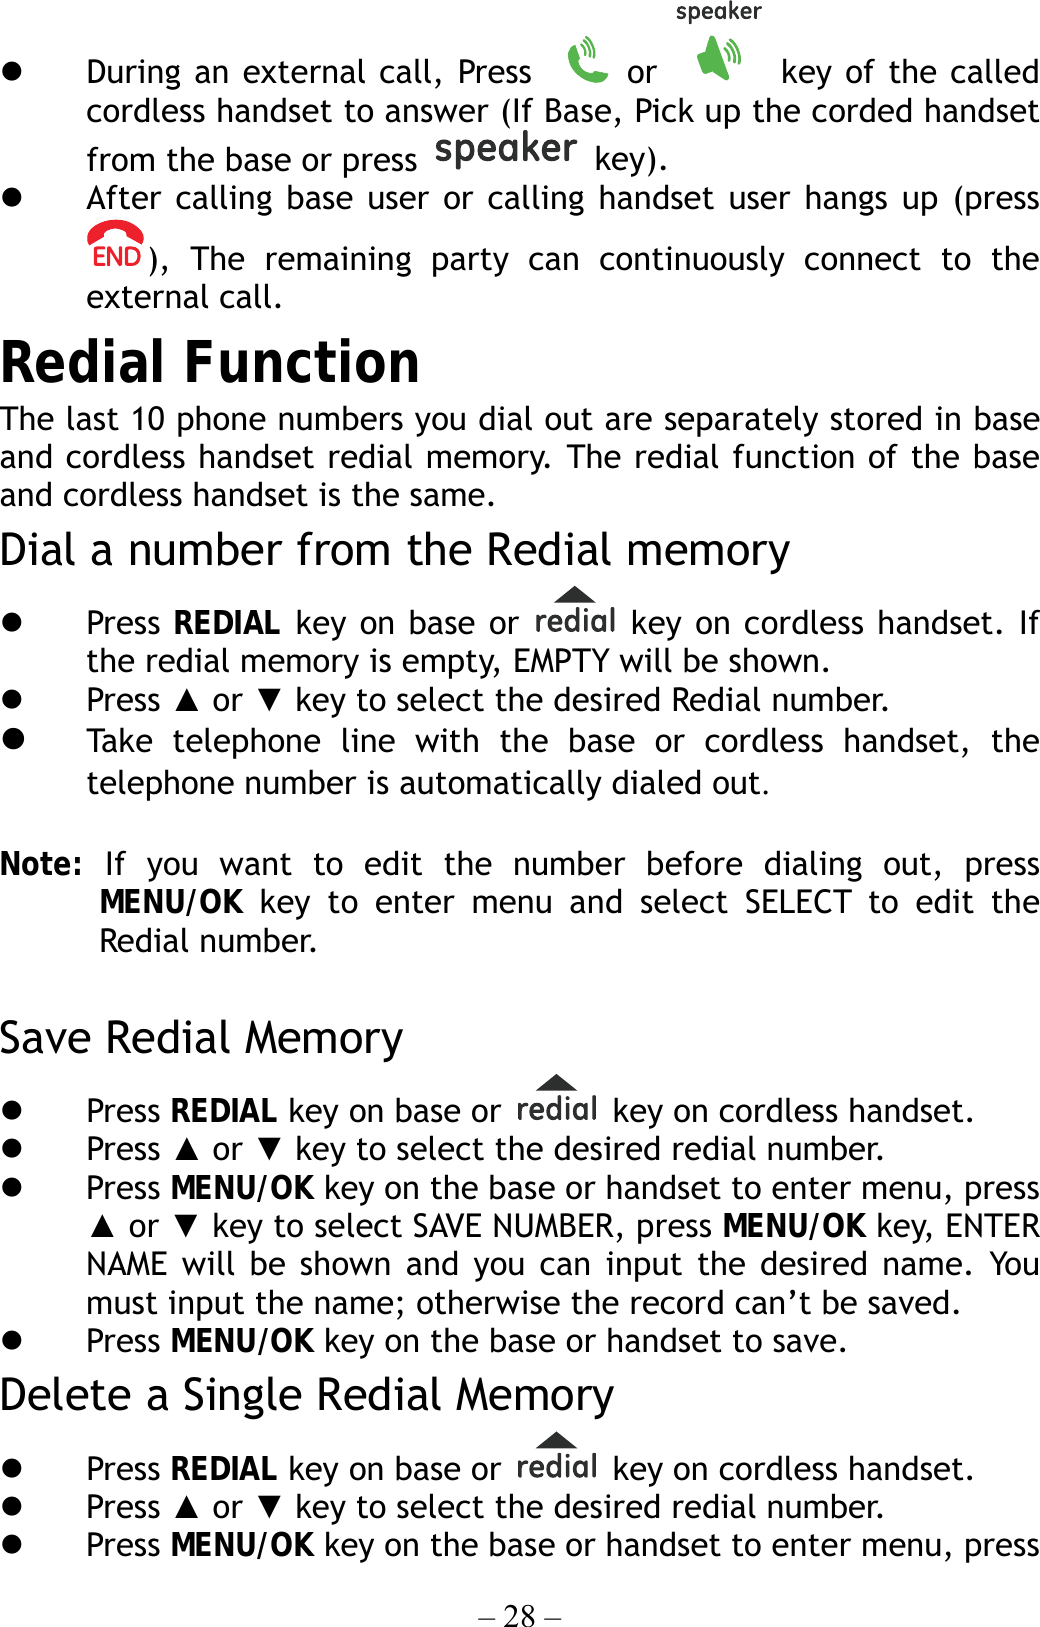 – 28 –   During an external call, Press    or   key of the called cordless handset to answer (If Base, Pick up the corded handset from the base or press   key).   After calling base user or calling handset user hangs up (press ), The remaining party can continuously connect to the external call. Redial Function The last 10 phone numbers you dial out are separately stored in base and cordless handset redial memory. The redial function of the base and cordless handset is the same. Dial a number from the Redial memory     Press  REDIAL key on base or   key on cordless handset. If the redial memory is empty, EMPTY will be shown.   Press ▲ or ▼ key to select the desired Redial number.   Take telephone line with the base or cordless handset, the telephone number is automatically dialed out.  Note:  If you want to edit the number before dialing out, press MENU/OK key to enter menu and select SELECT to edit the Redial number.  Save Redial Memory   Press REDIAL key on base or   key on cordless handset.     Press ▲ or ▼ key to select the desired redial number.   Press MENU/OK key on the base or handset to enter menu, press ▲ or ▼ key to select SAVE NUMBER, press MENU/OK key, ENTER NAME will be shown and you can input the desired name. You must input the name; otherwise the record can’t be saved.   Press MENU/OK key on the base or handset to save. Delete a Single Redial Memory   Press REDIAL key on base or    key on cordless handset.     Press ▲ or ▼ key to select the desired redial number.   Press MENU/OK key on the base or handset to enter menu, press 